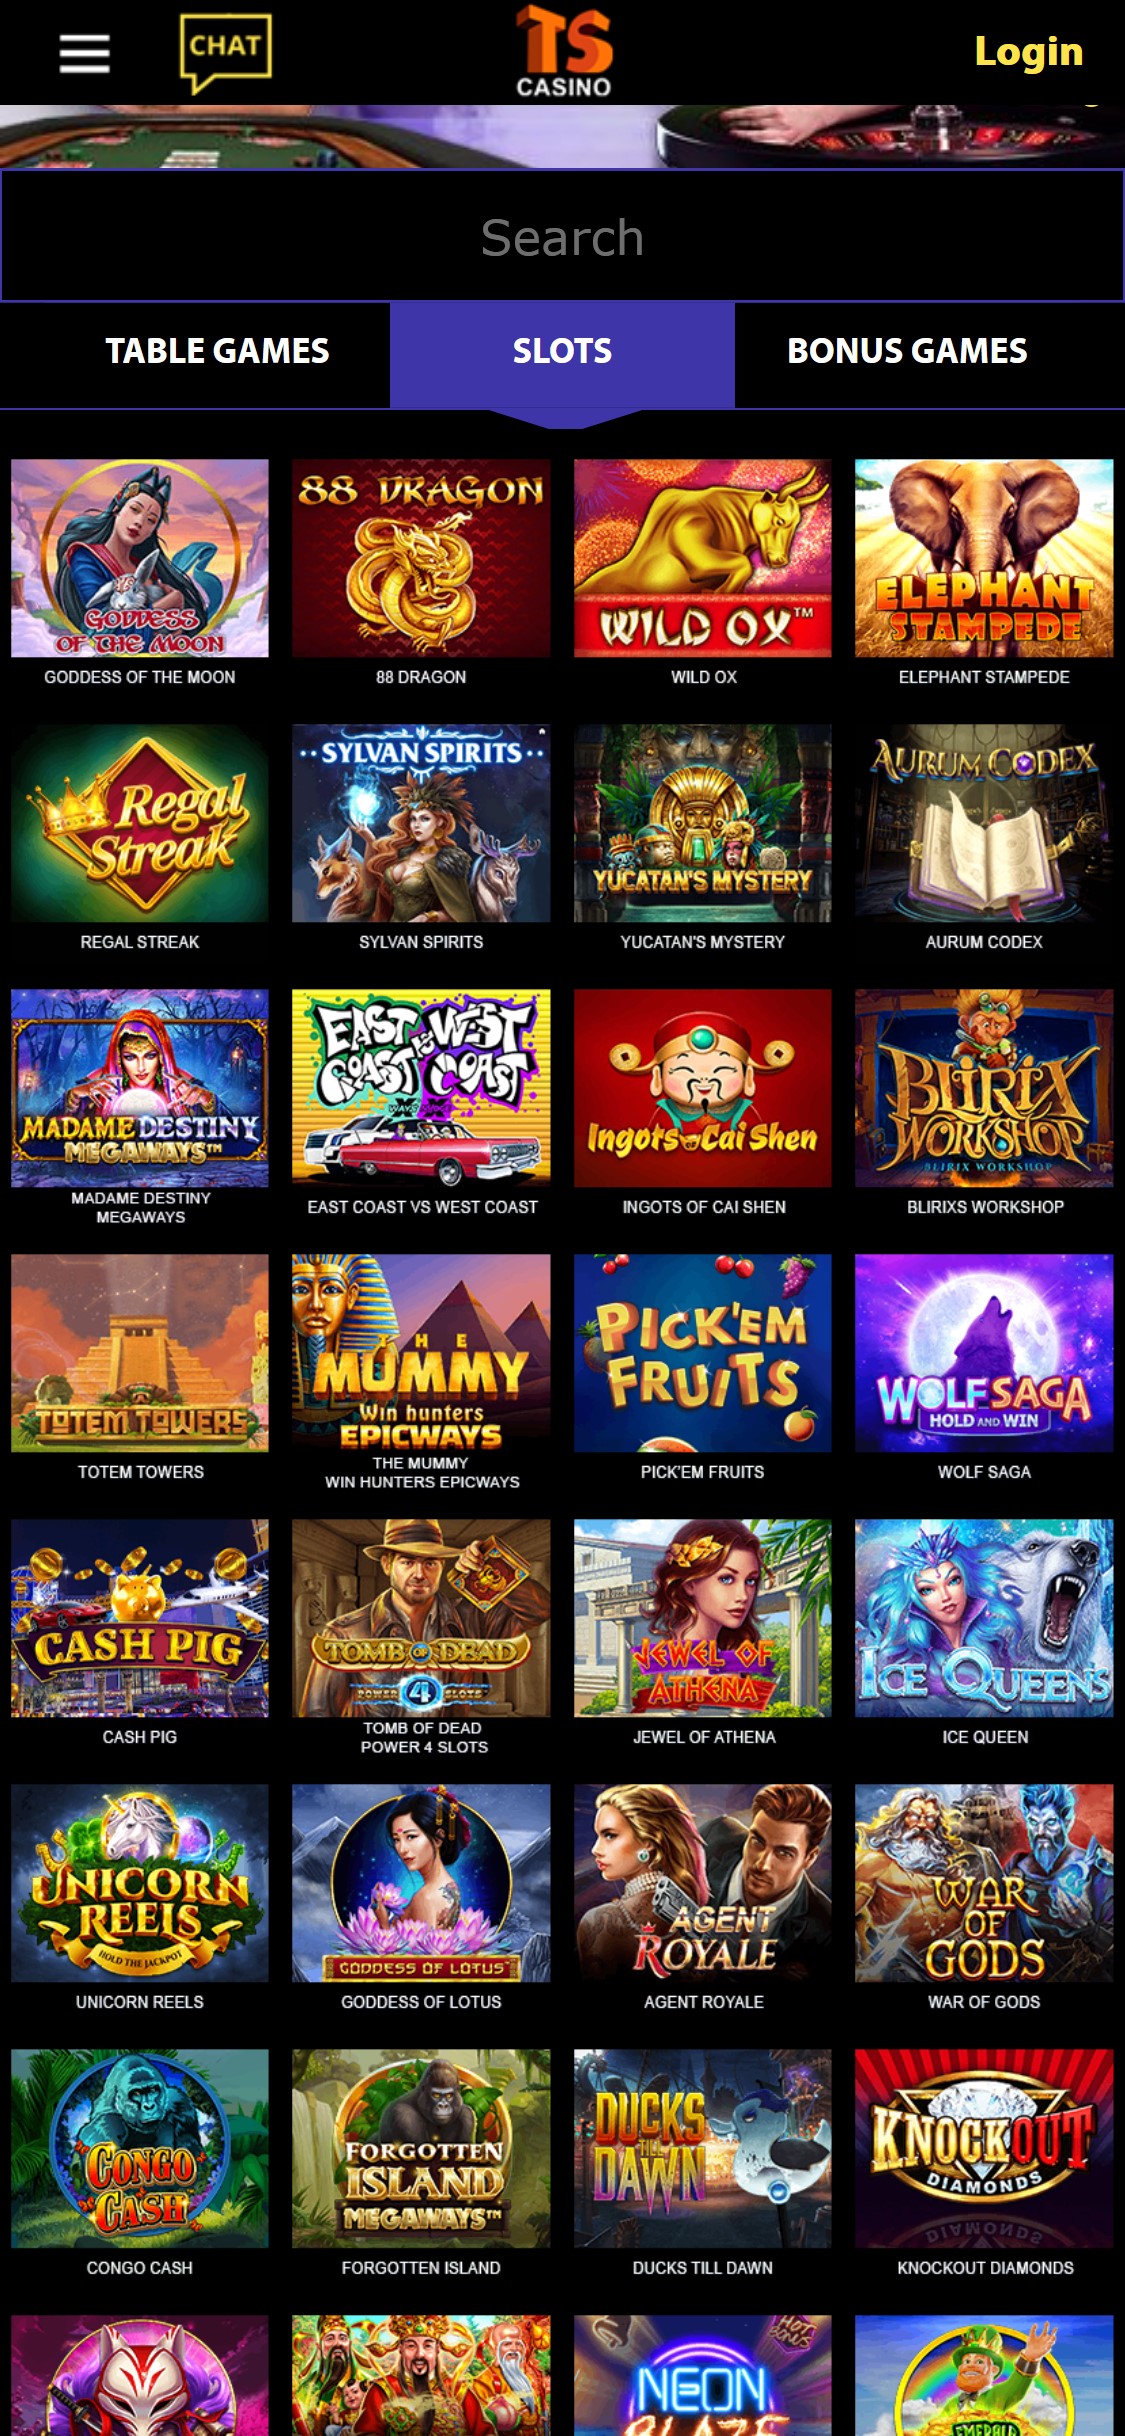 Times Square Casino Mobile Games Review